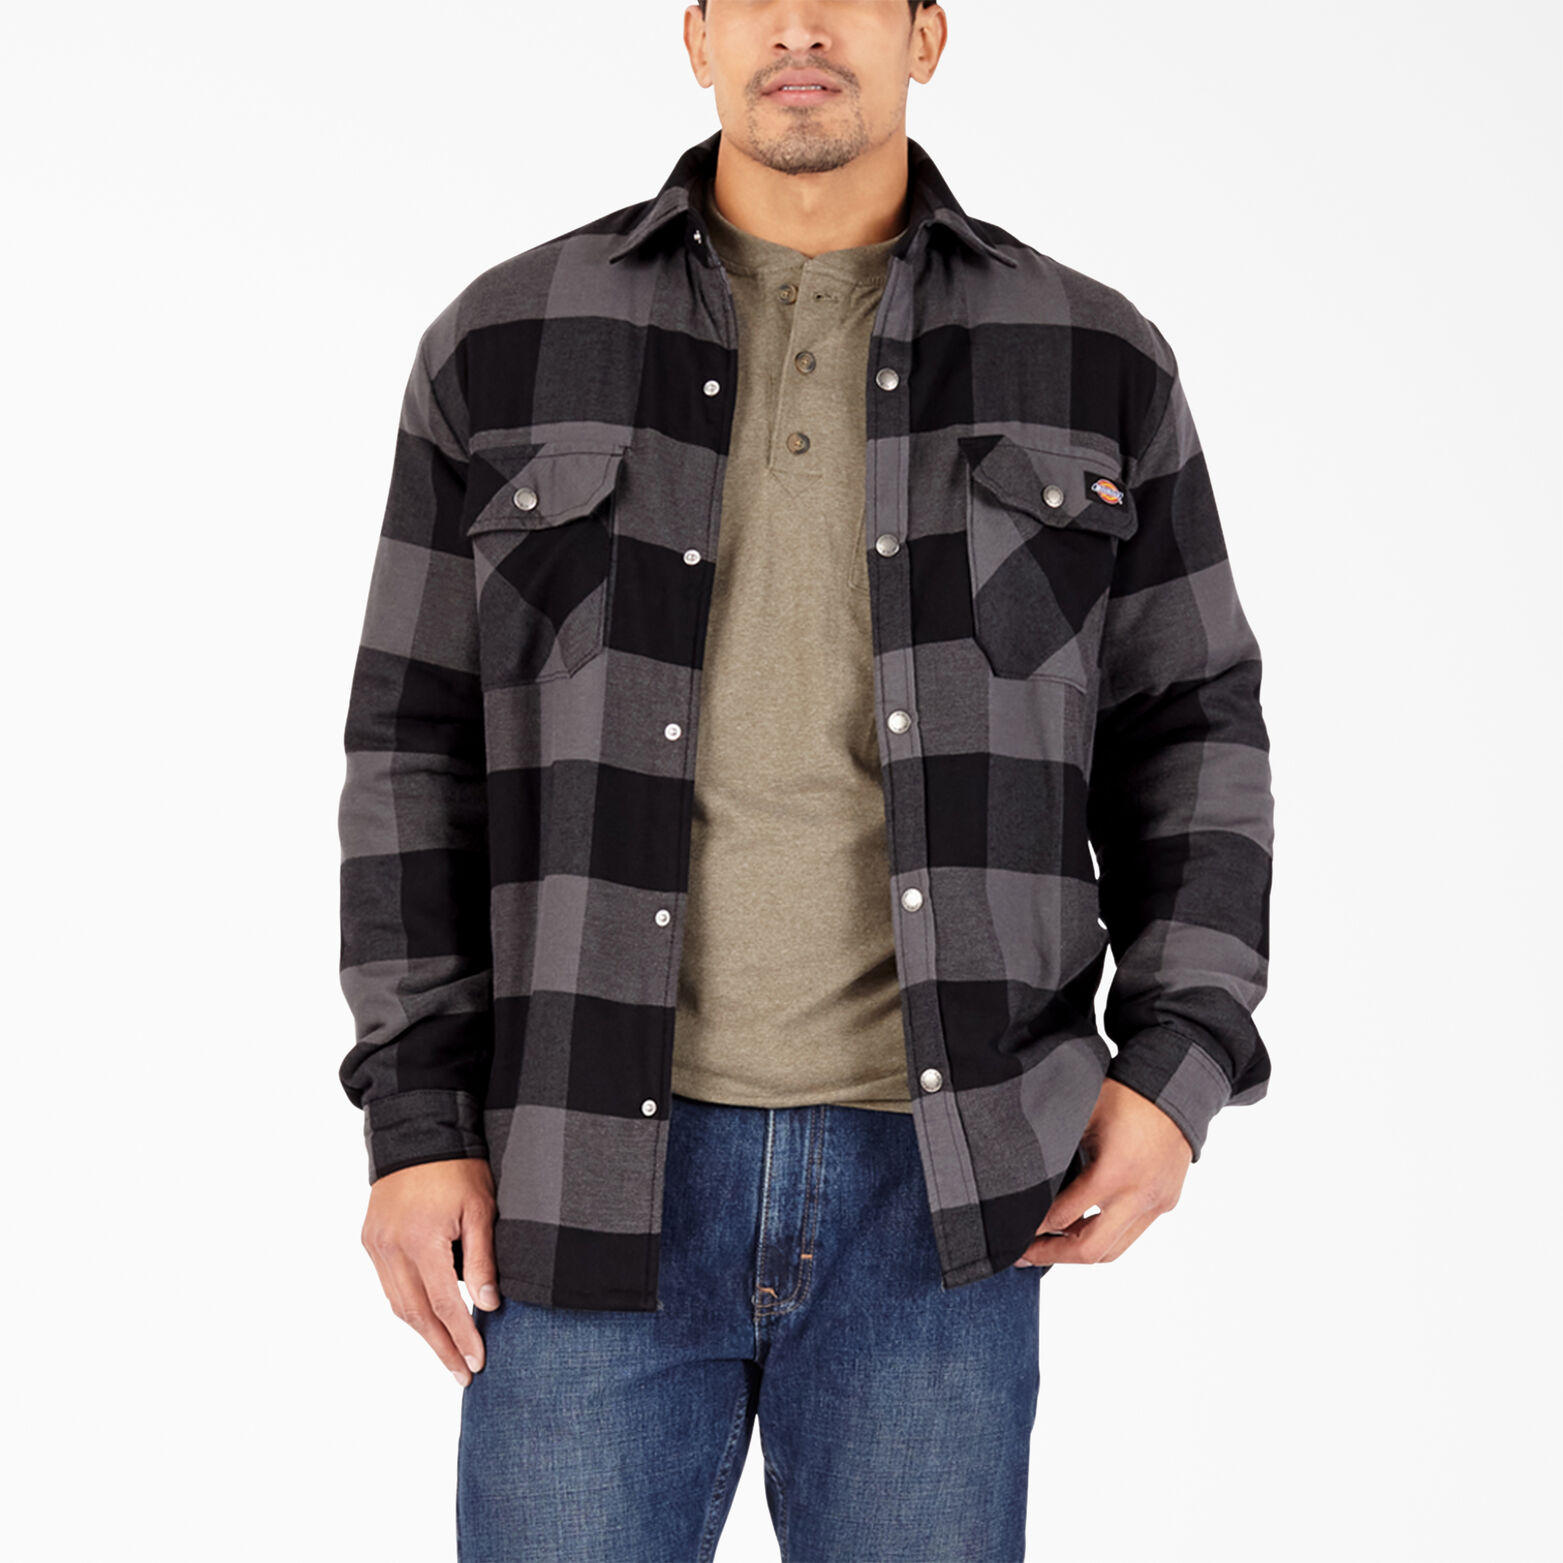 Sherpa Lined Flannel Shirt Jacket with Hydroshield | Mens Shirt Jackets ...